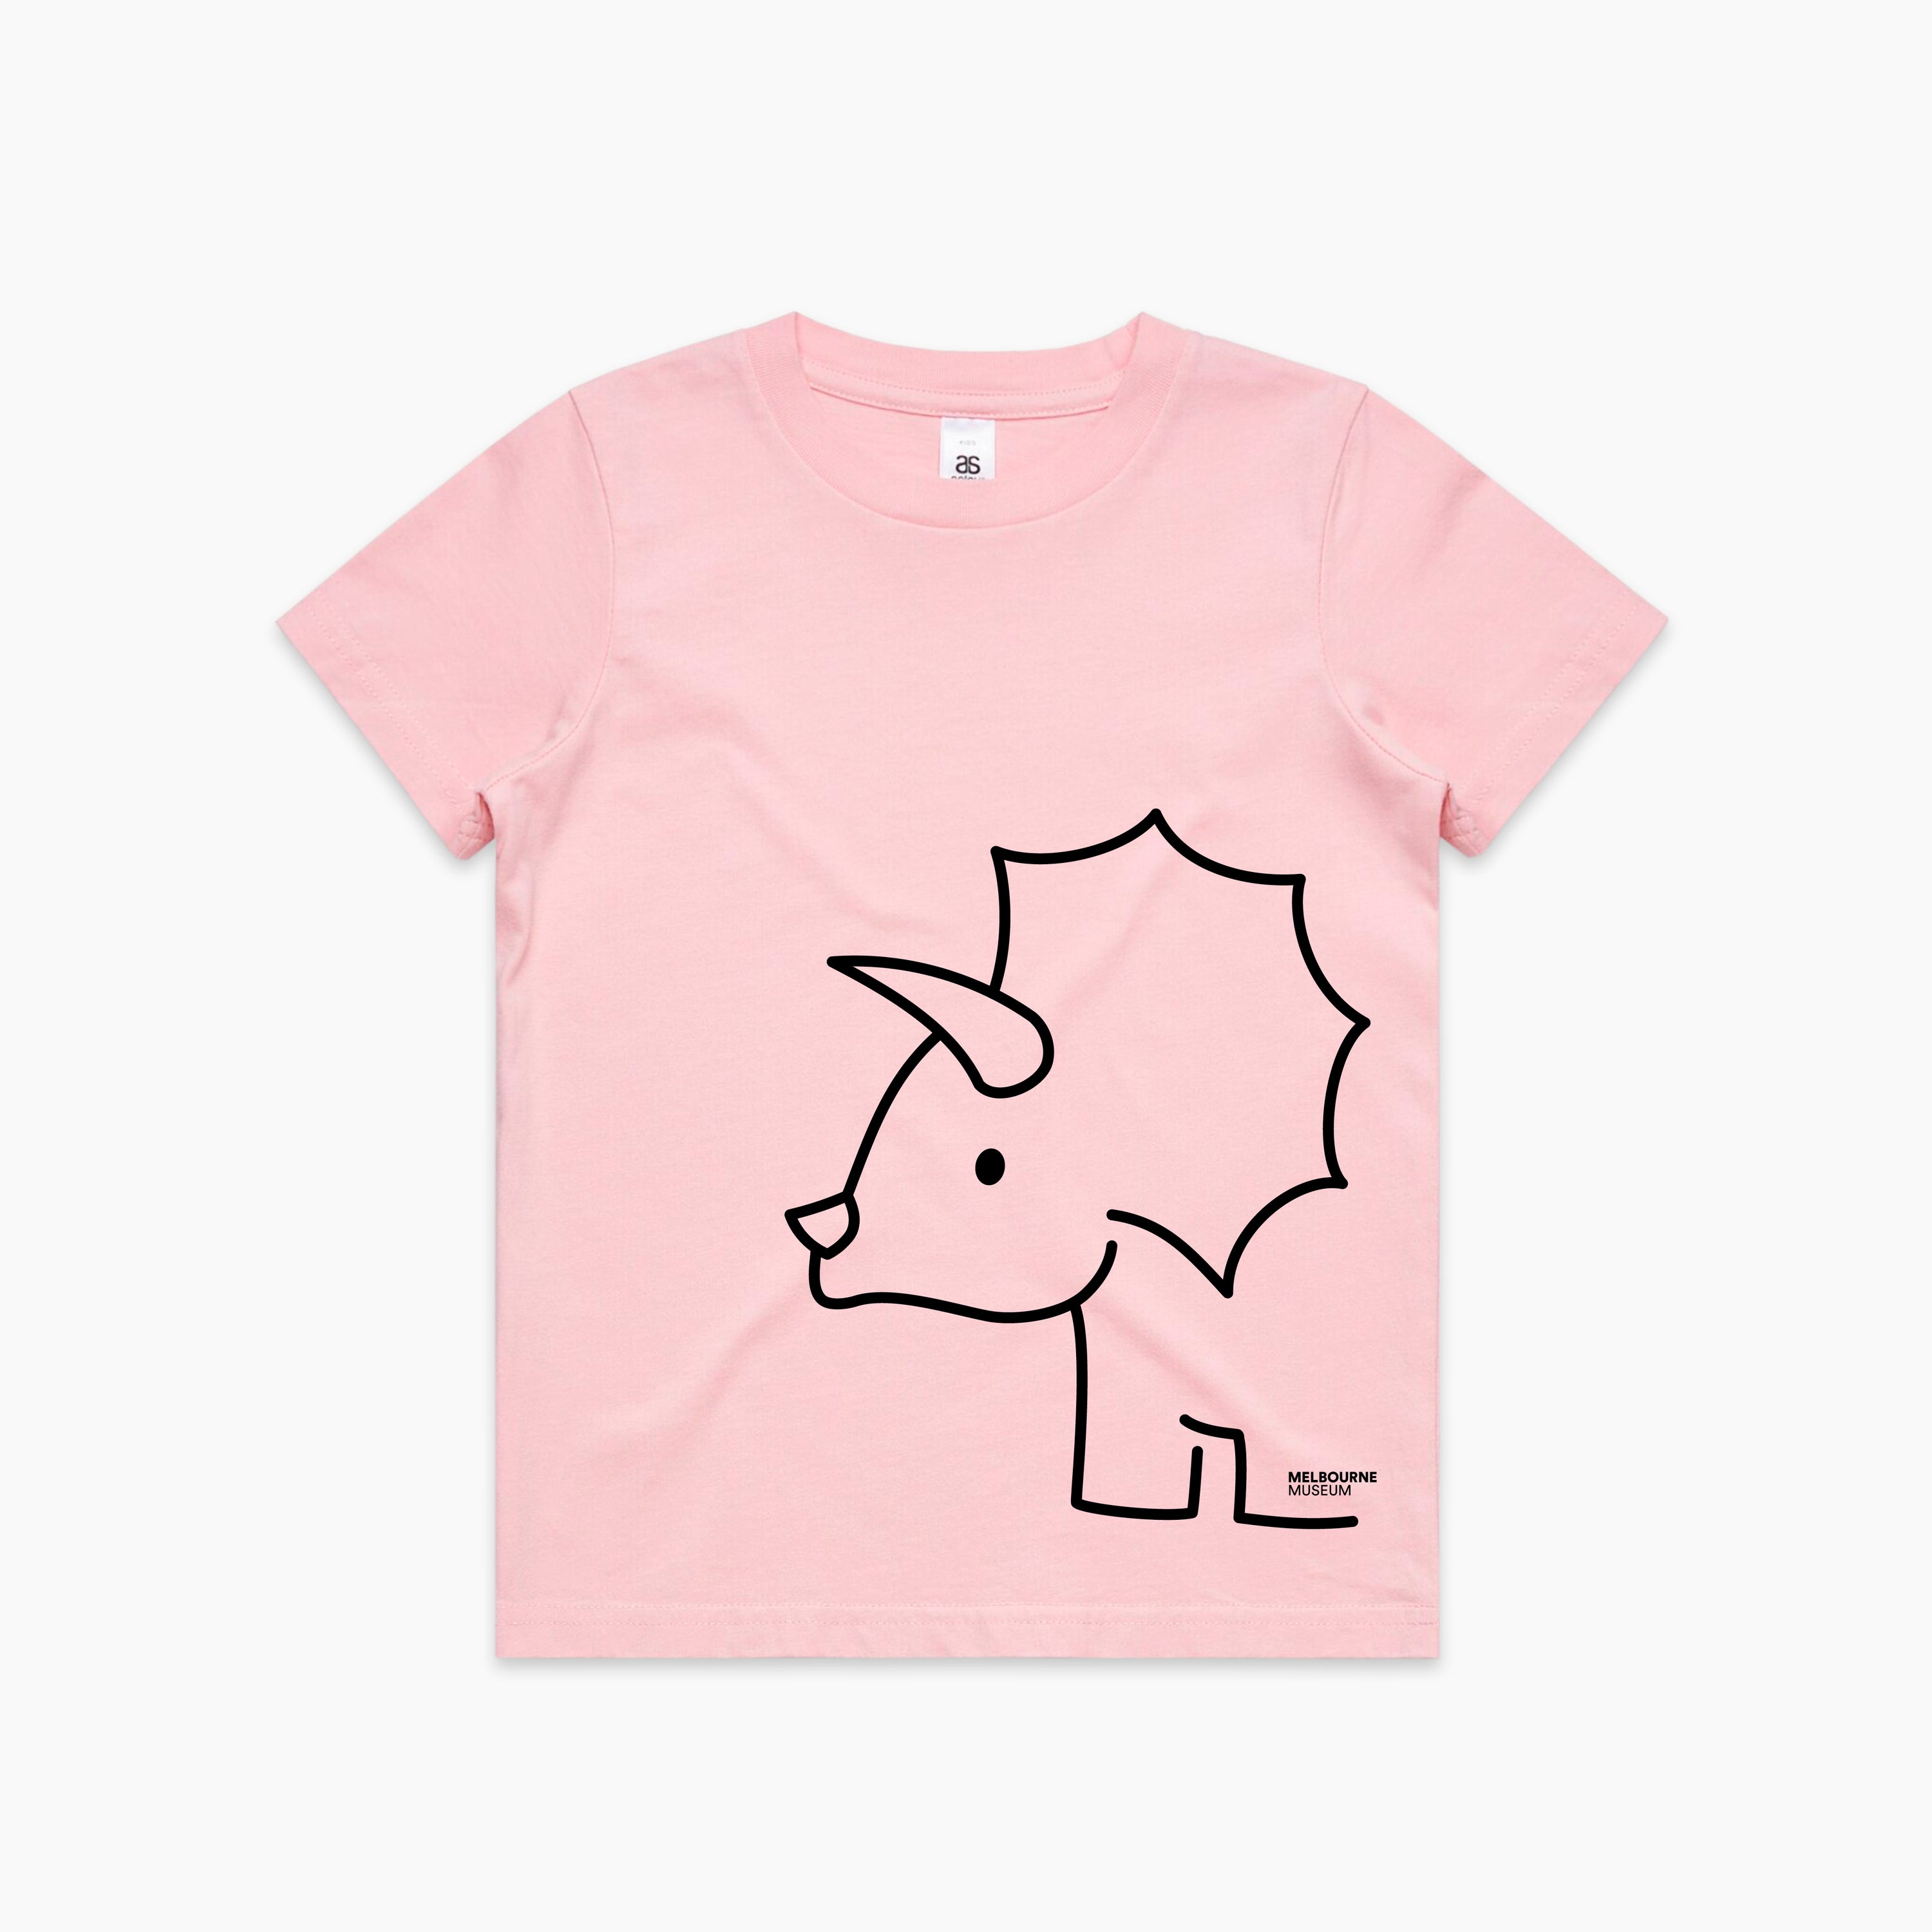 Melbourne Museum Pink Triceratops Kids Tee